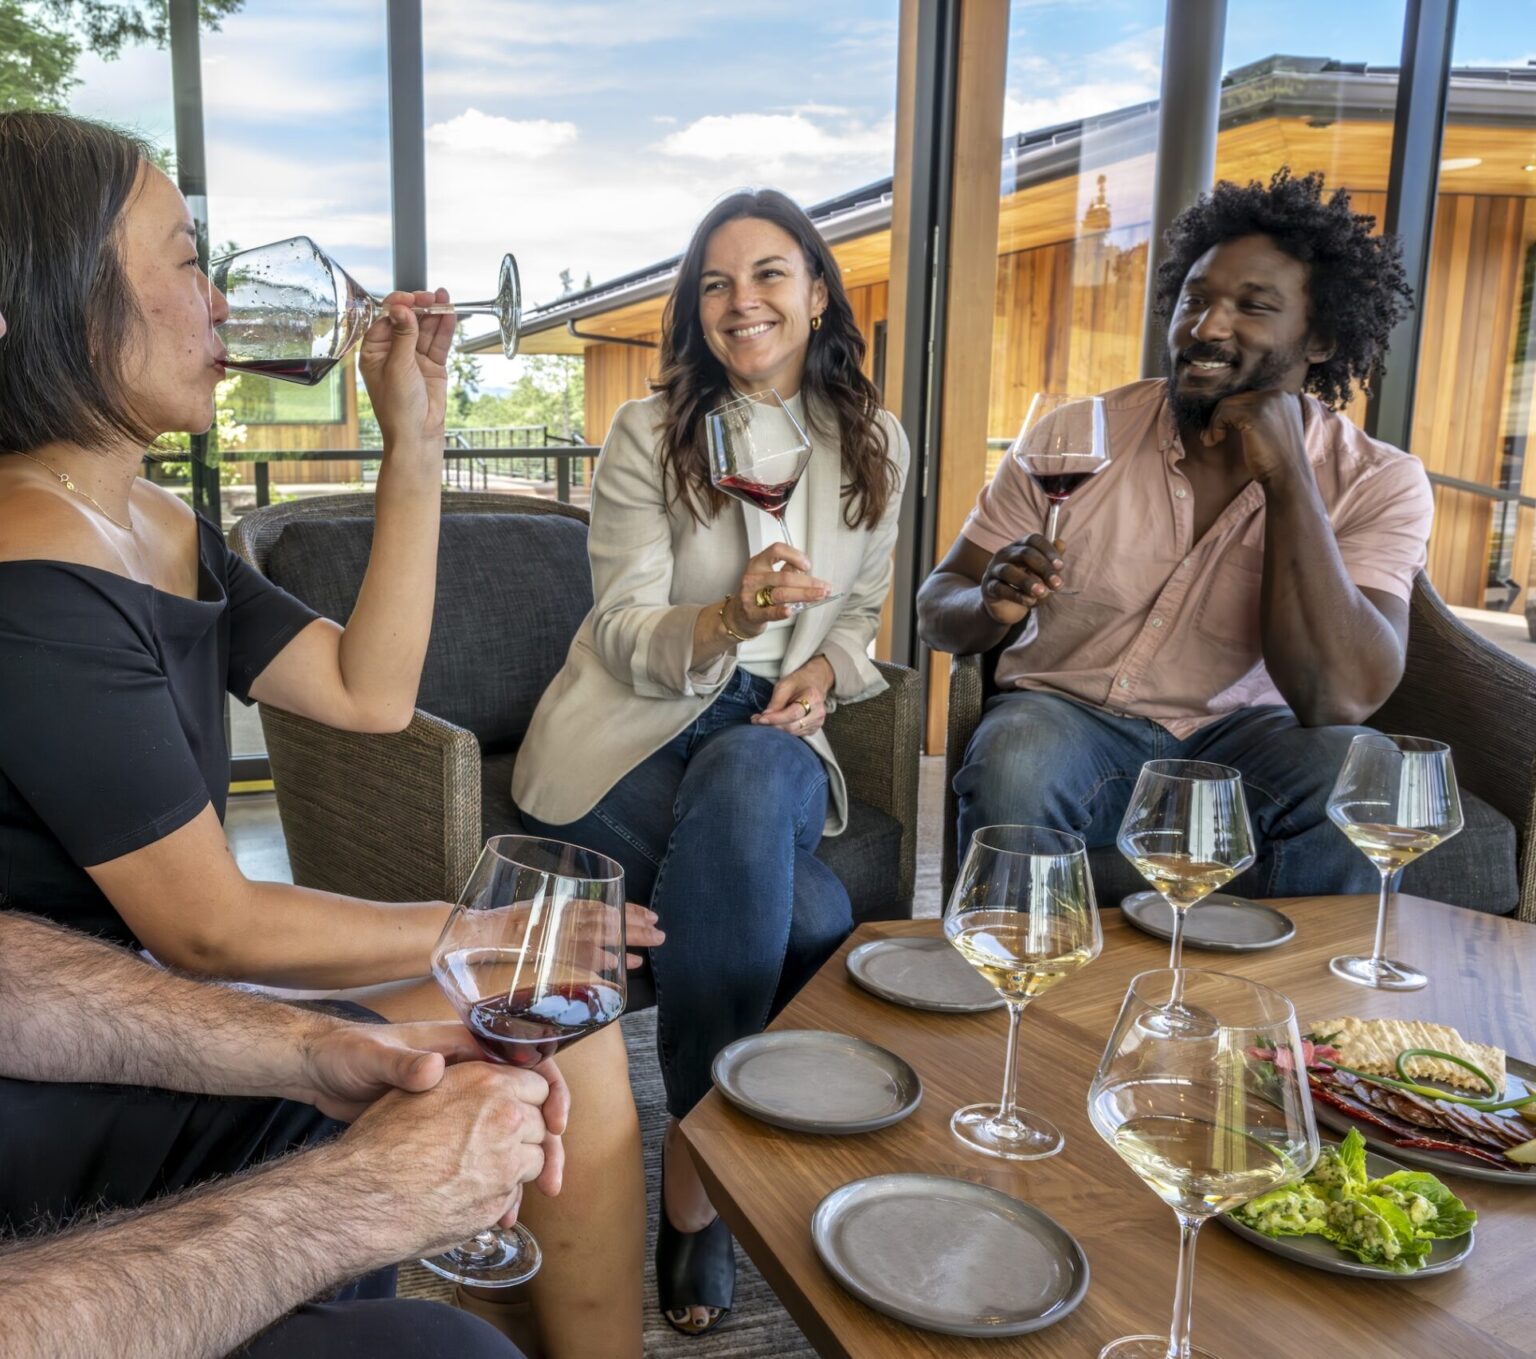 A group of four people are seated at a table, enjoying glasses of Willamette Valley Chardonnay and engaging in conversation. Various wine glasses and plates are on the table, creating a warm and convivial atmosphere.